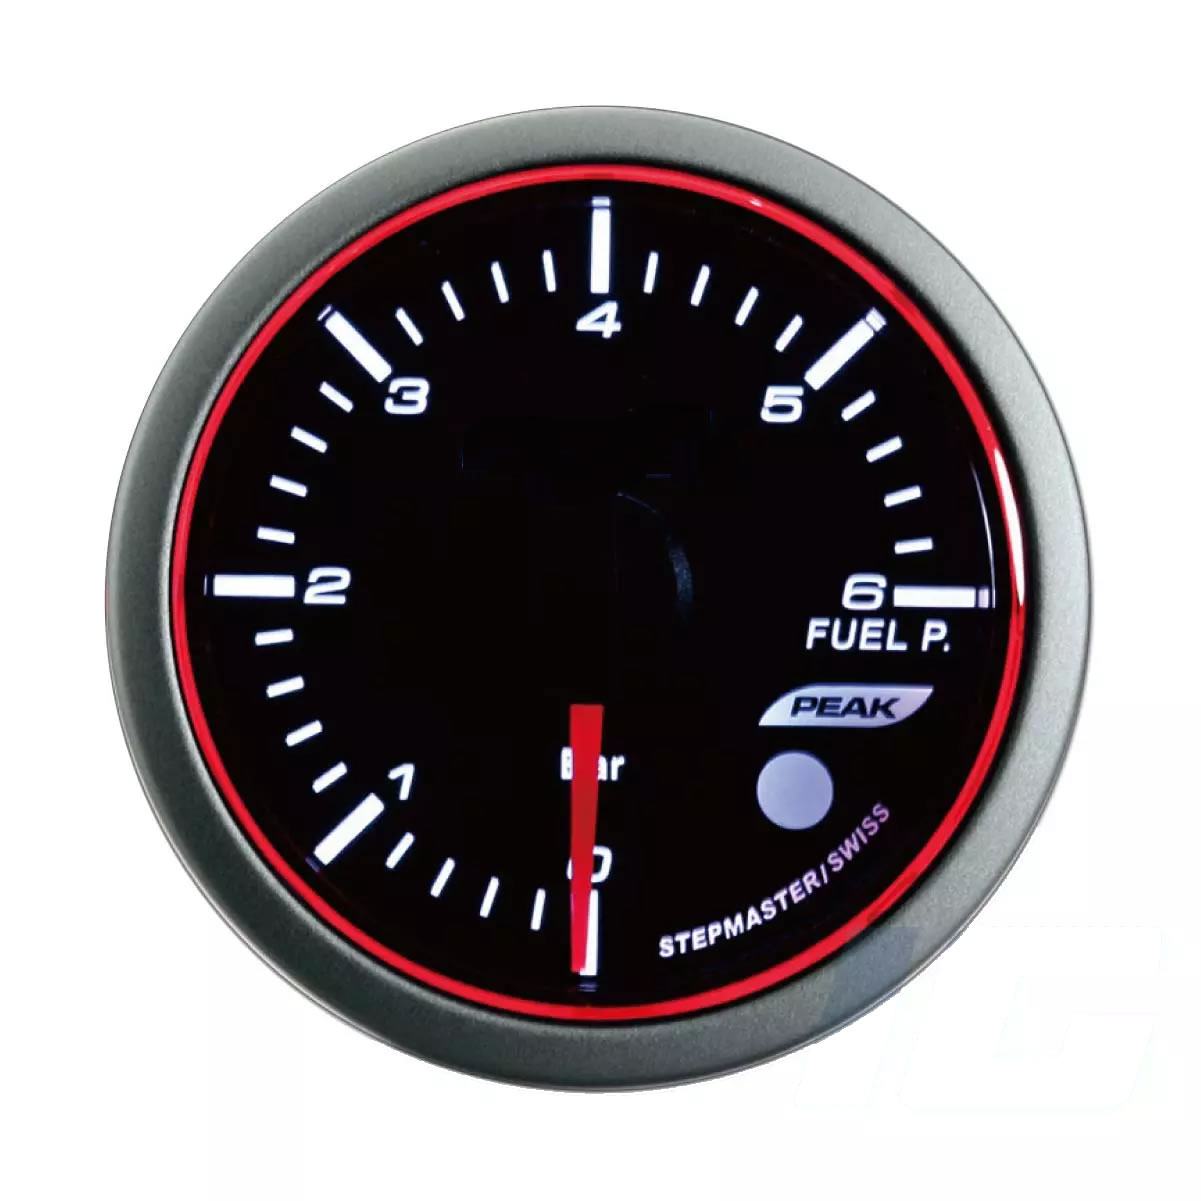 Performance Car Gauges - Fuel Pressure Gauge With Sensor and Warning and Peak For Your Sport Racing Cars